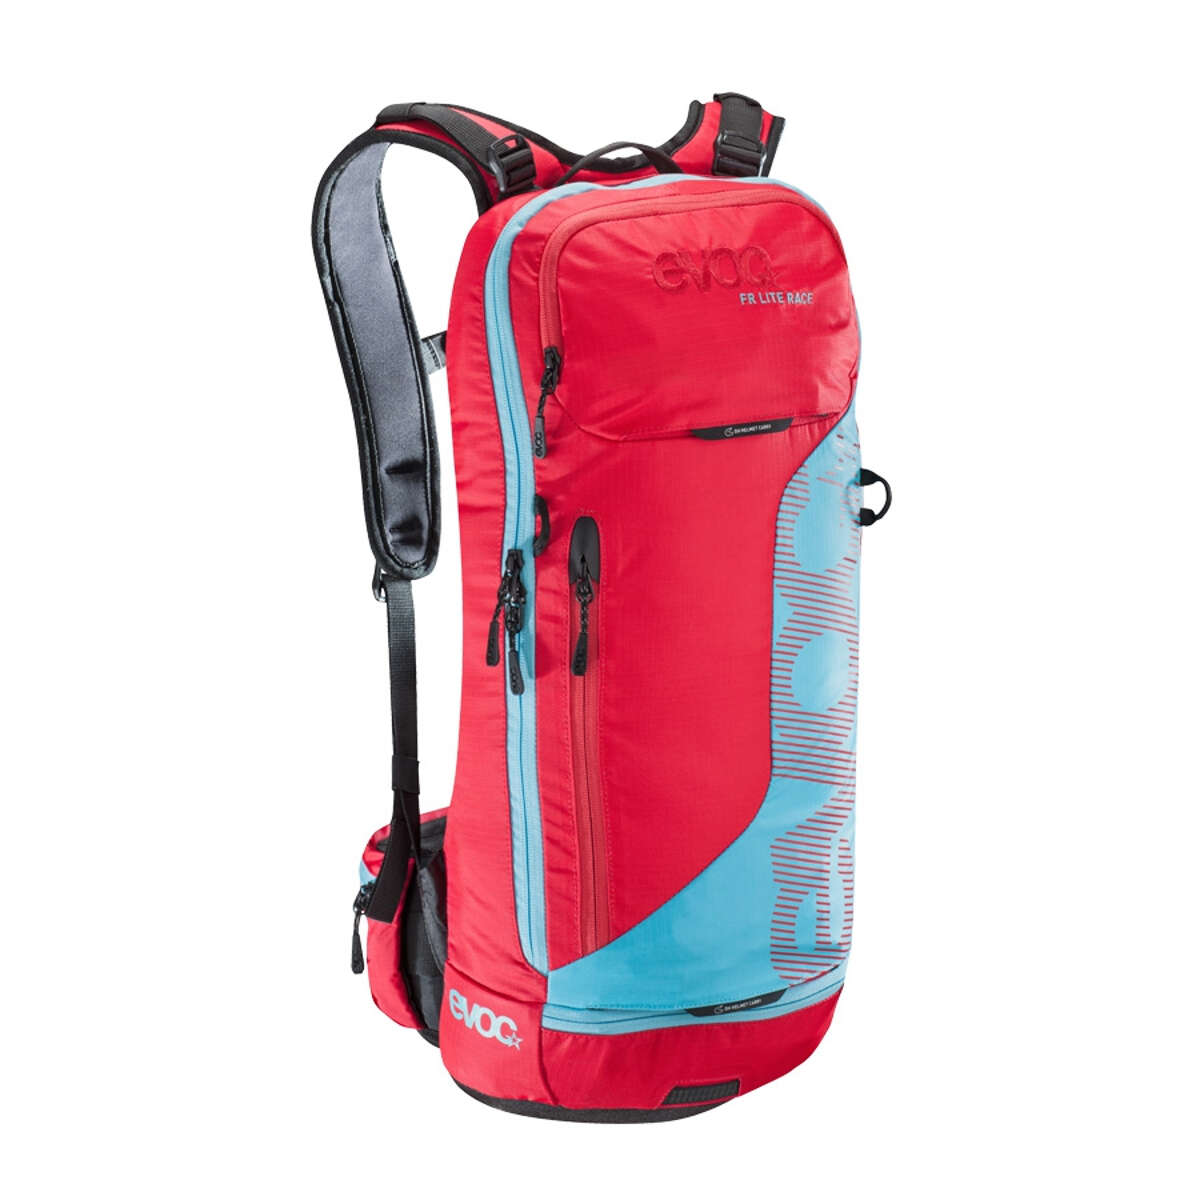 Evoc Protector Backpack with Hydration System Compartment FR Lite Red/Neon Blue, 10 Liter